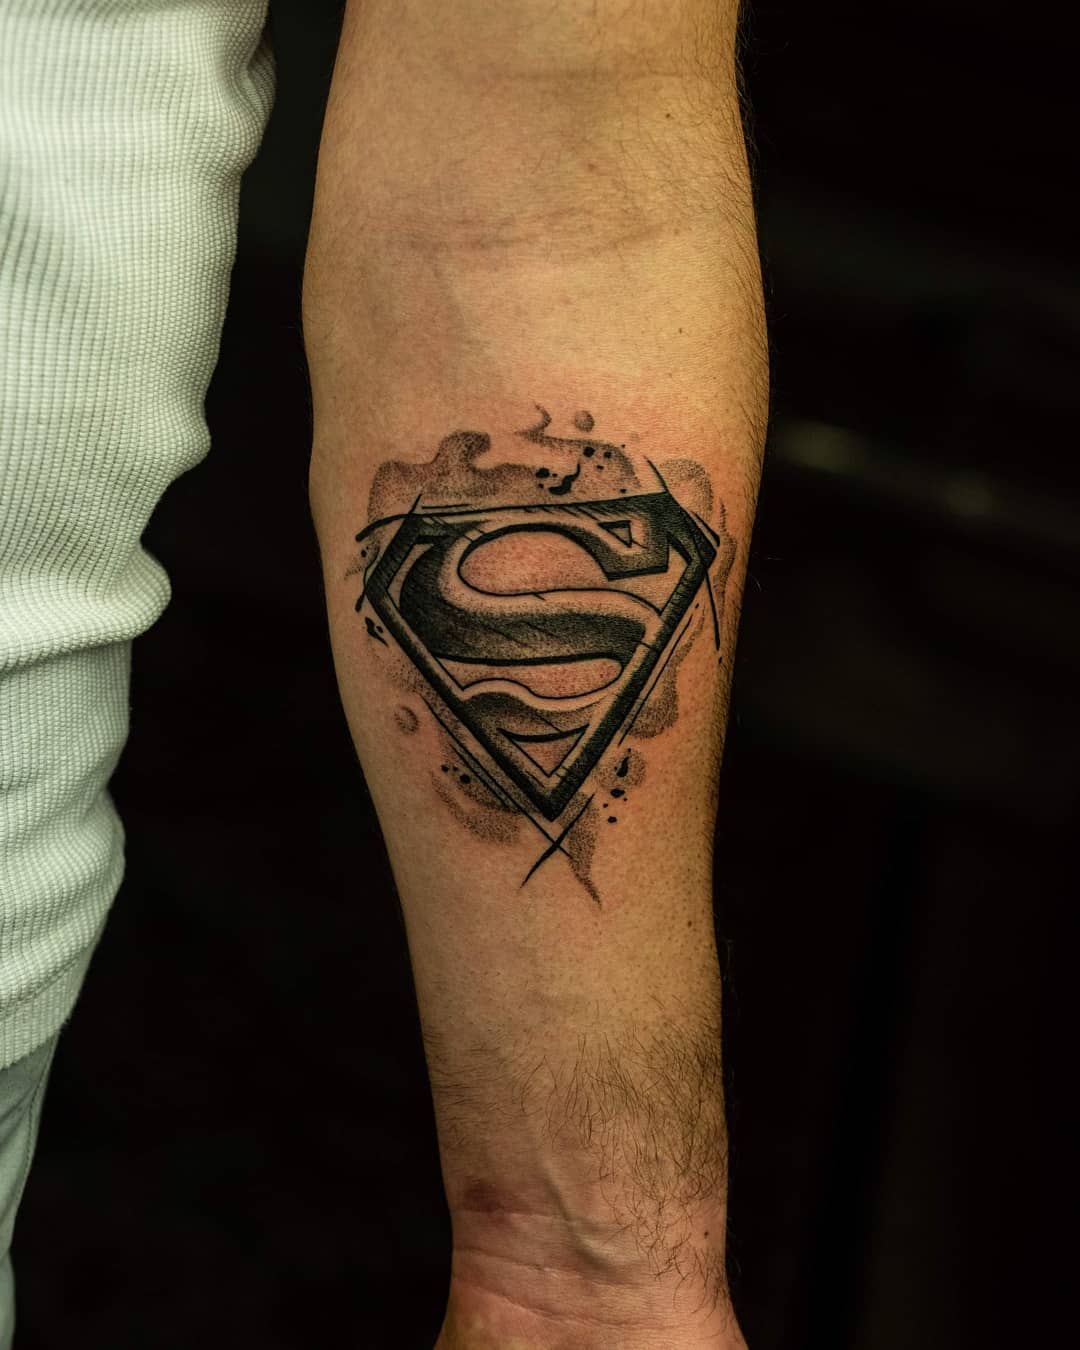 The Top 45 Superman Tattoo Ideas - [2021 Inspiration Guide]